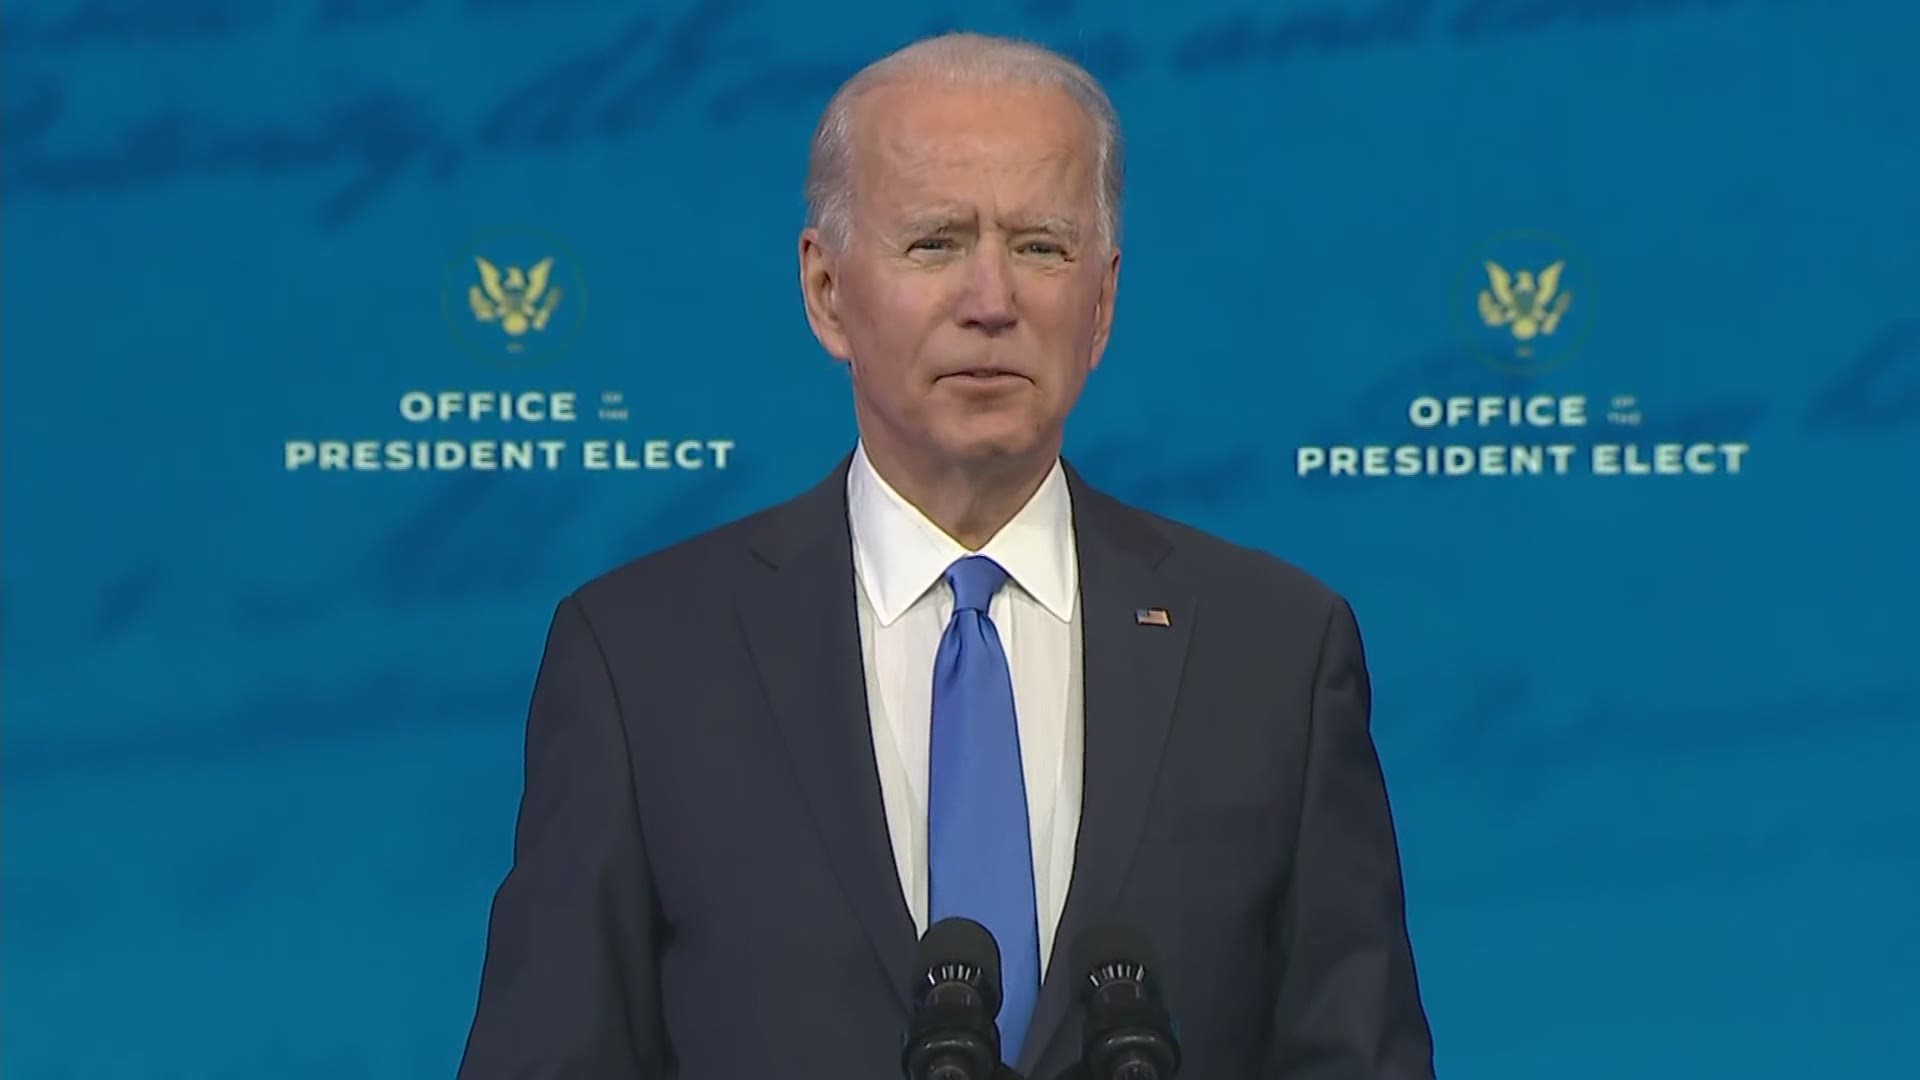 President-elect Joe Biden asked President Donald Trump to accept the outcome of the election after earning 306 electoral votes.